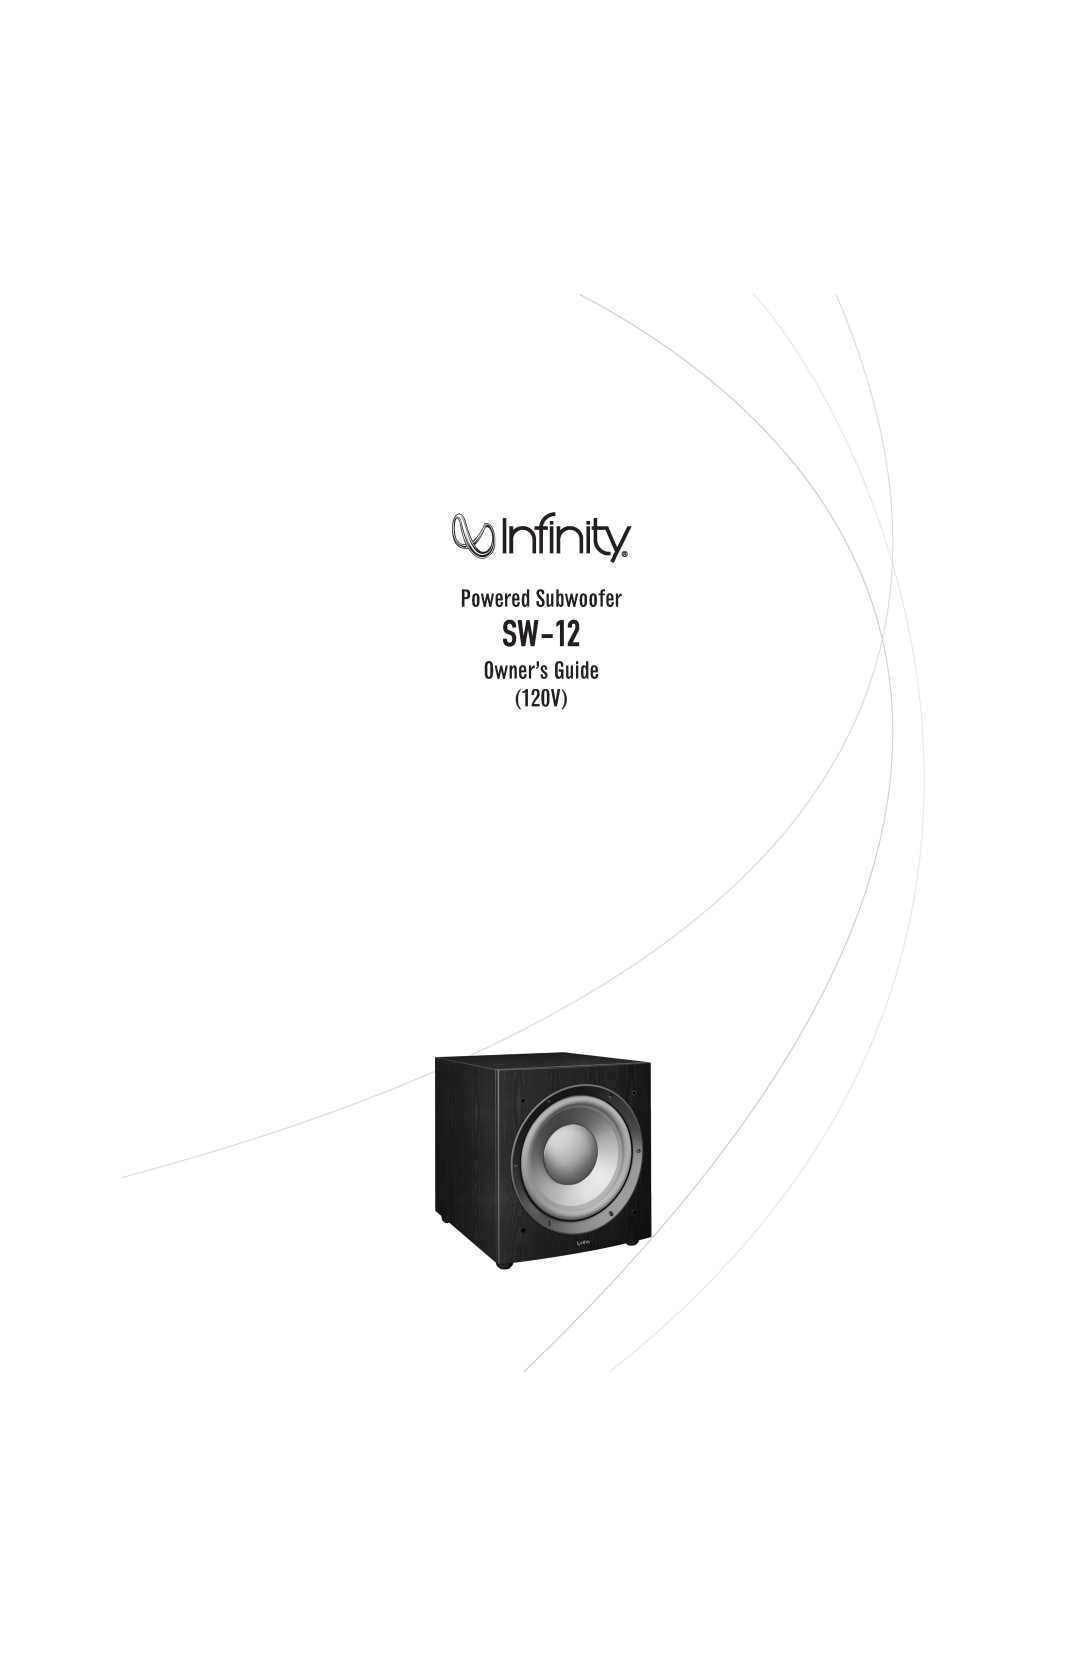 Infinity SW-12 manual Powered Subwoofer, Owner’s Guide 120V 